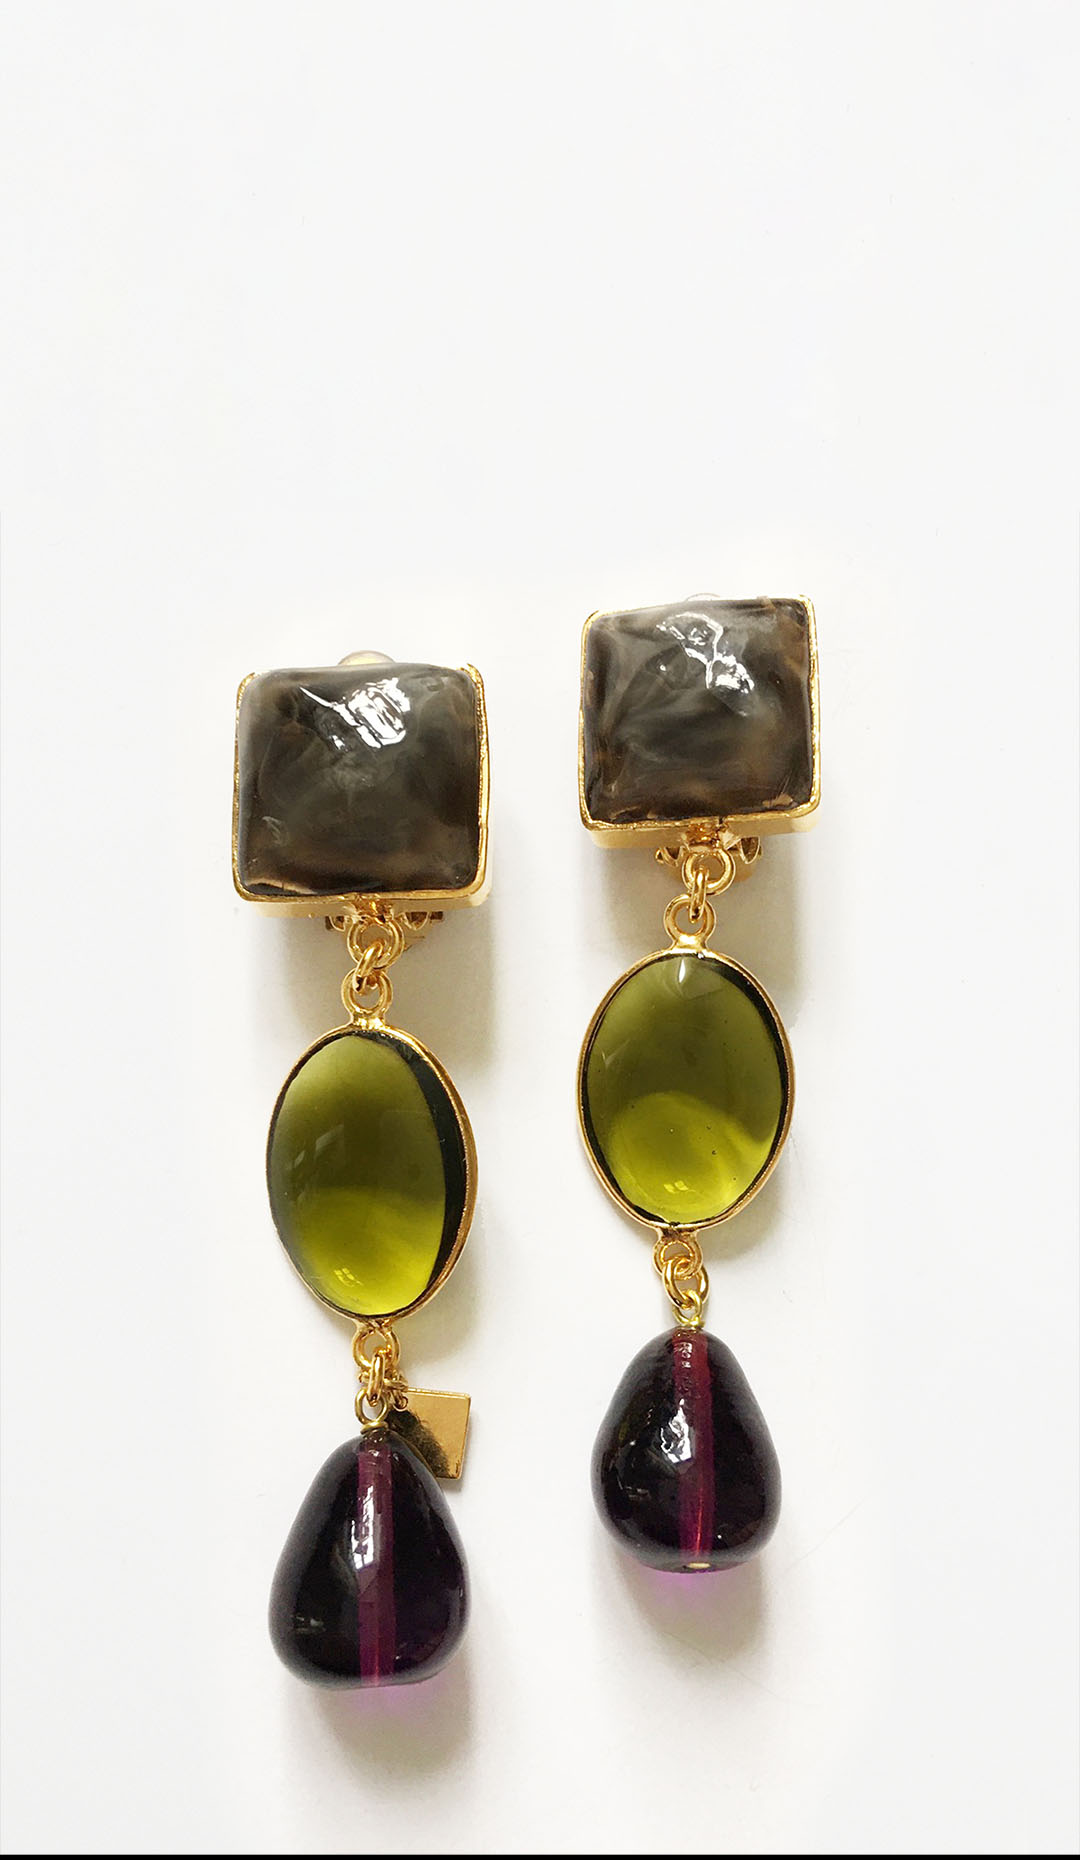 Pave Pebble and Drop Clip Earrings